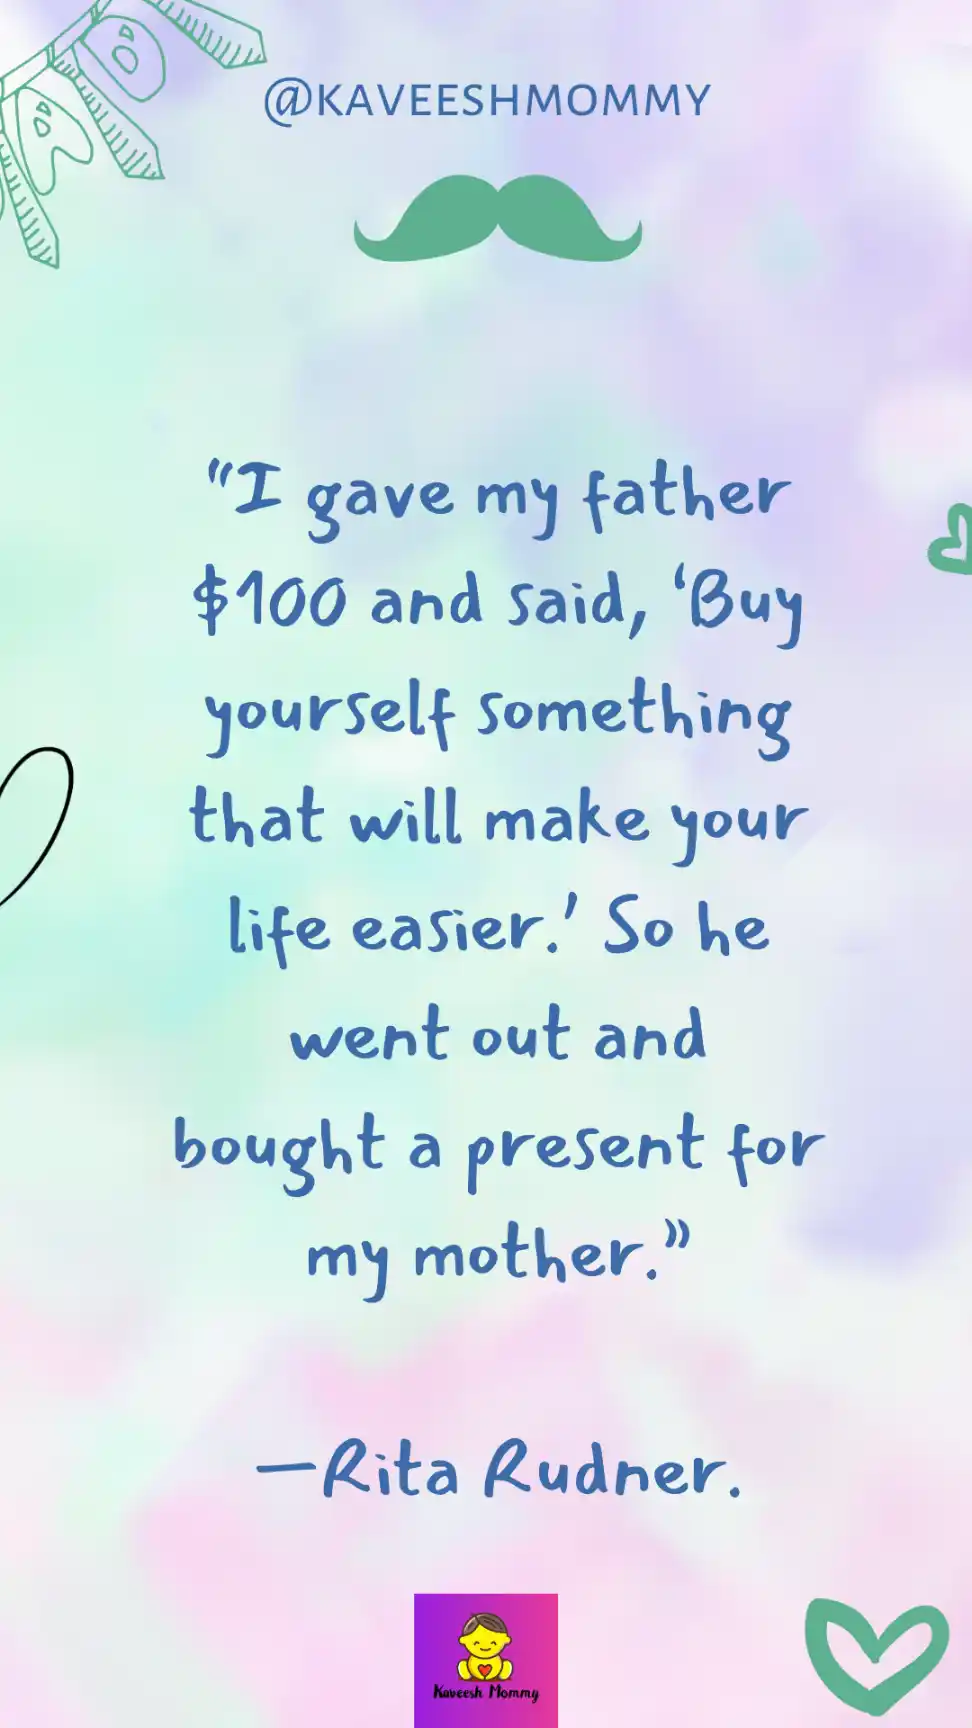 Share a little love & laughter | Fathers day quotes, Funny-kaveesh mommy-